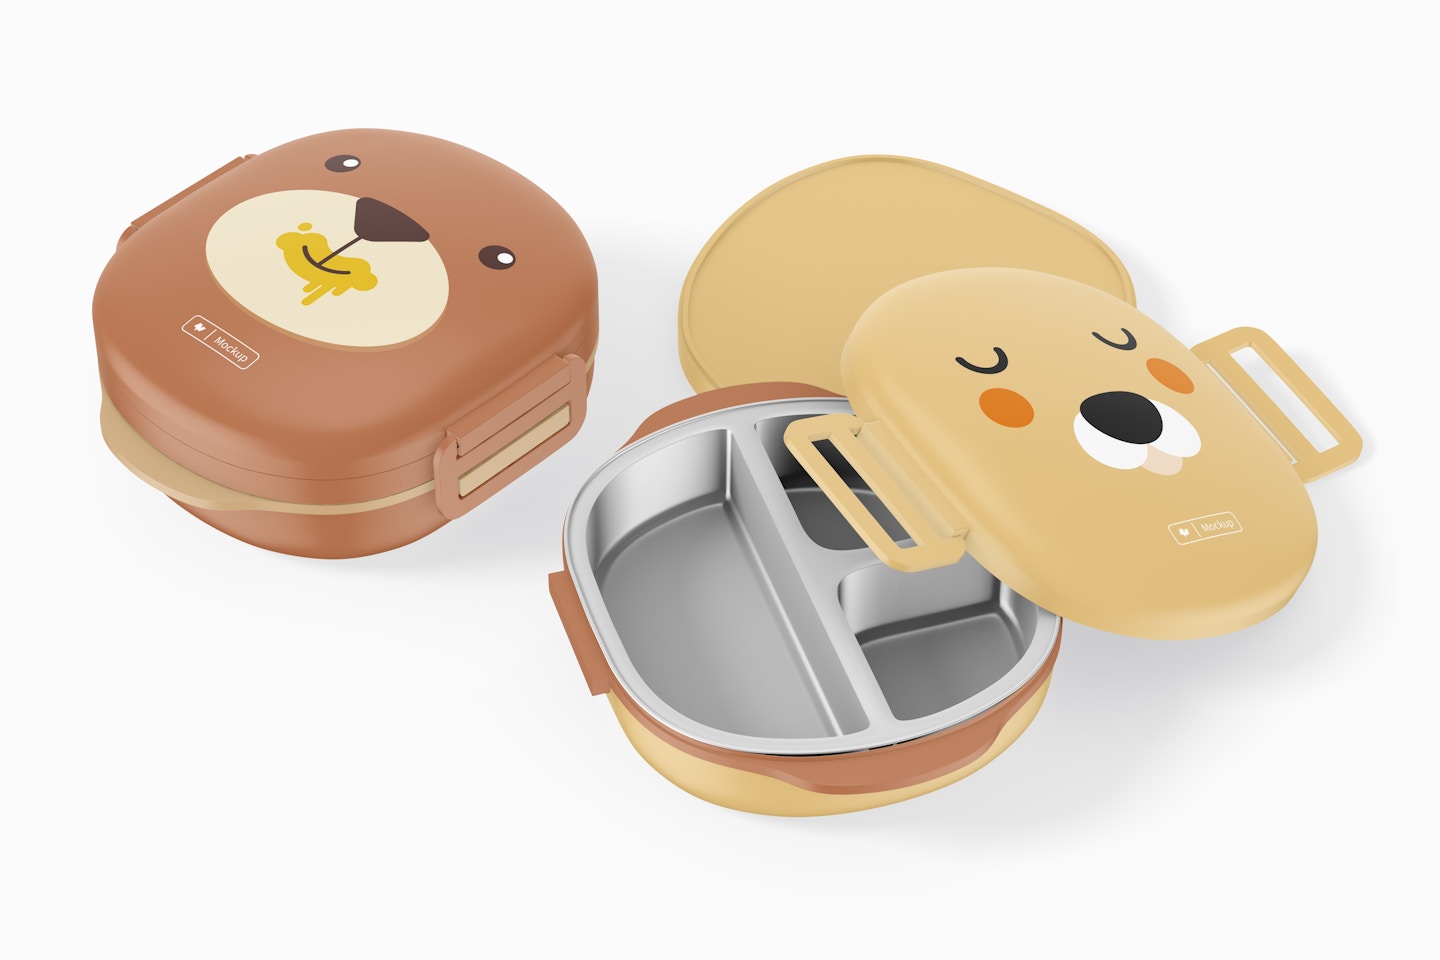 Round Lunch Boxes Mockup, Opened and Closed